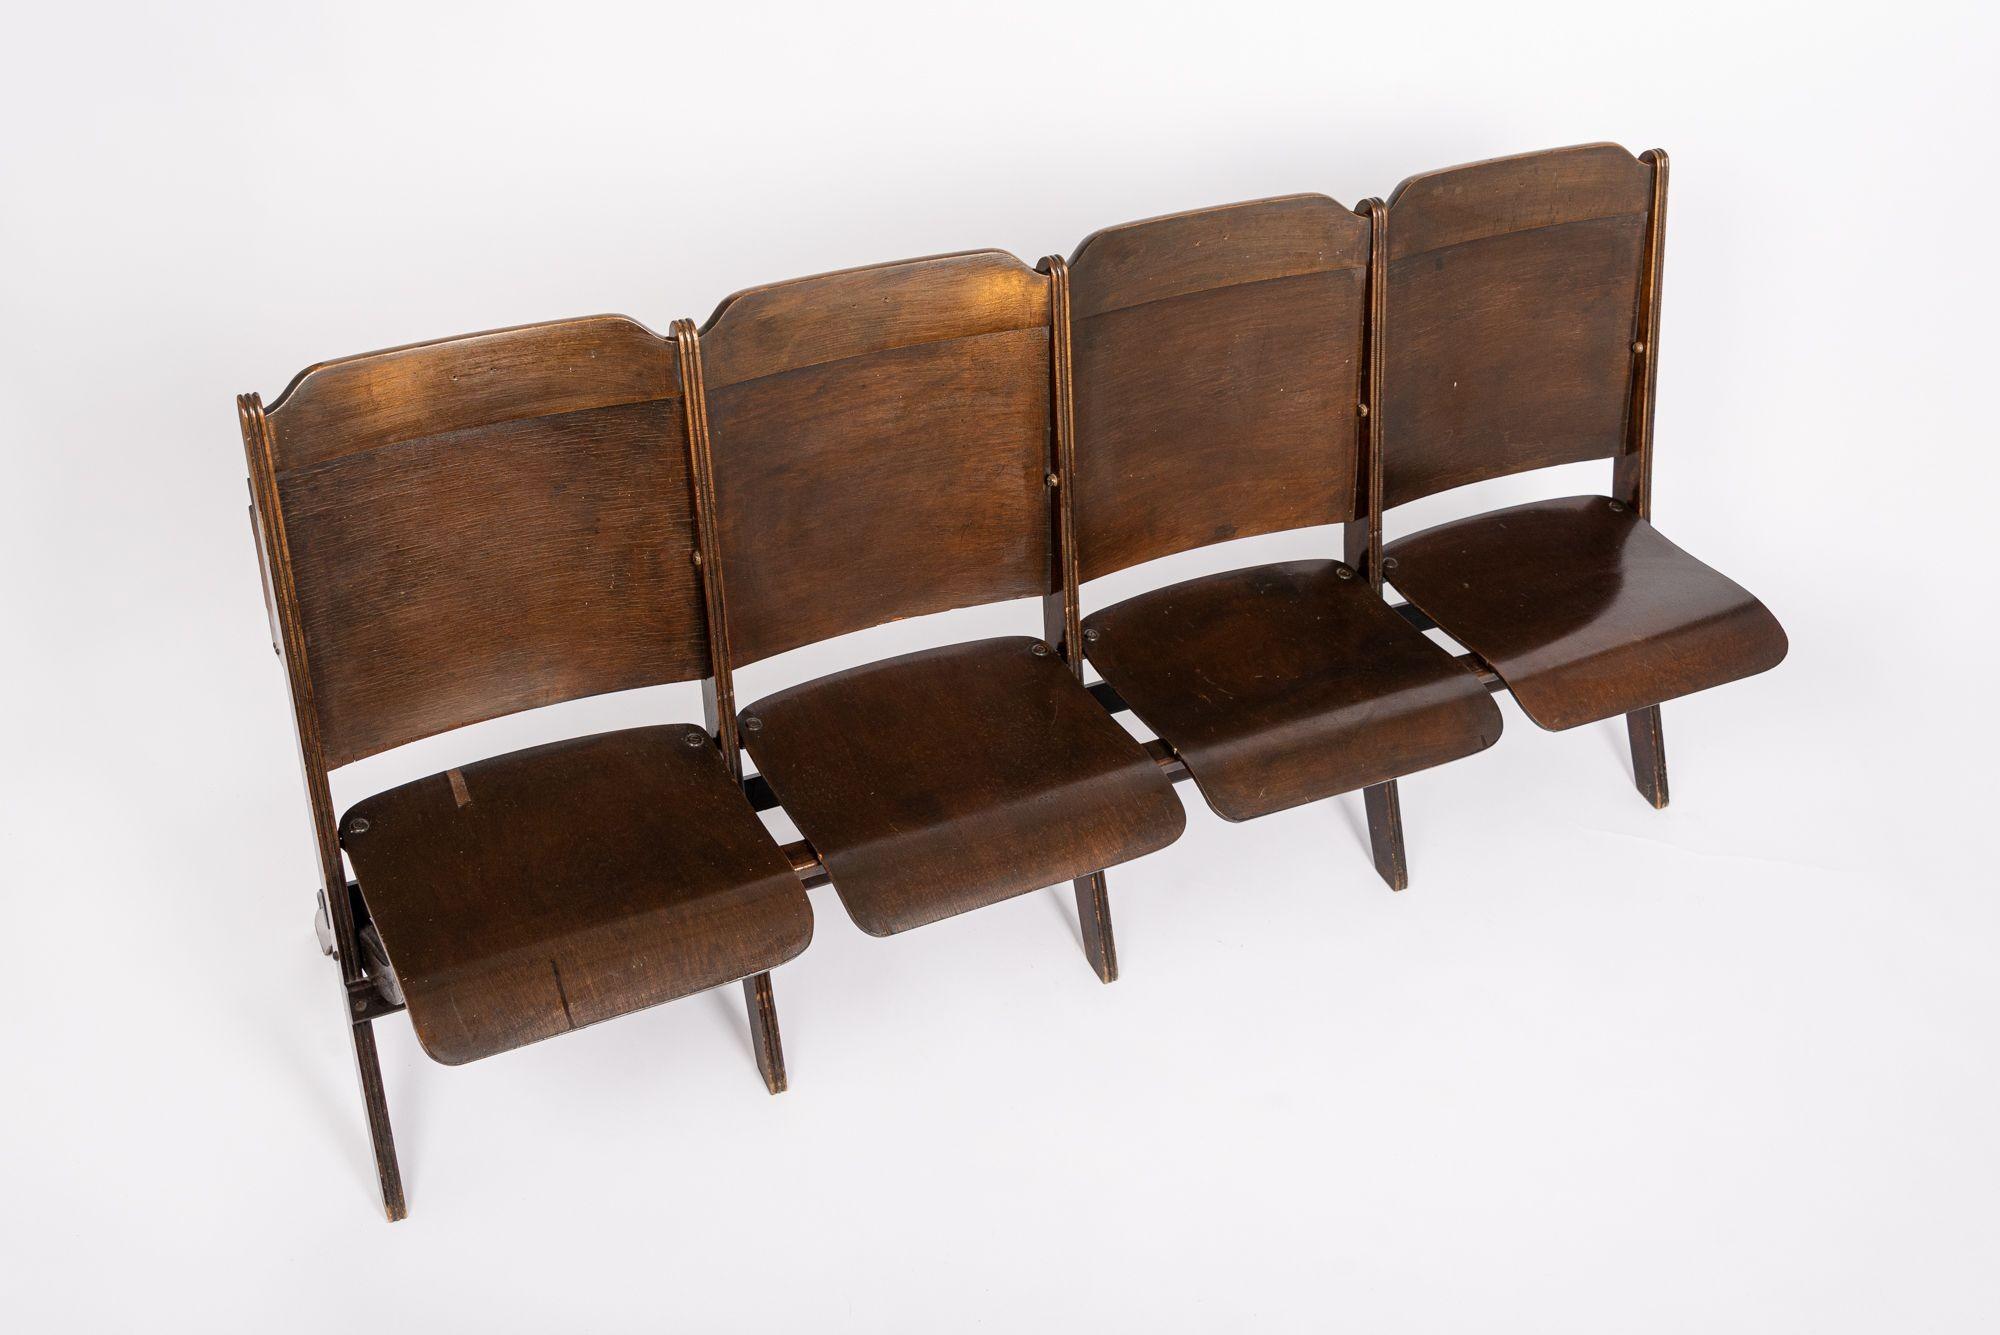 Mid-20th Century Antique Wood Theater Chairs Four-Seat Folding, GM Building, Detroit